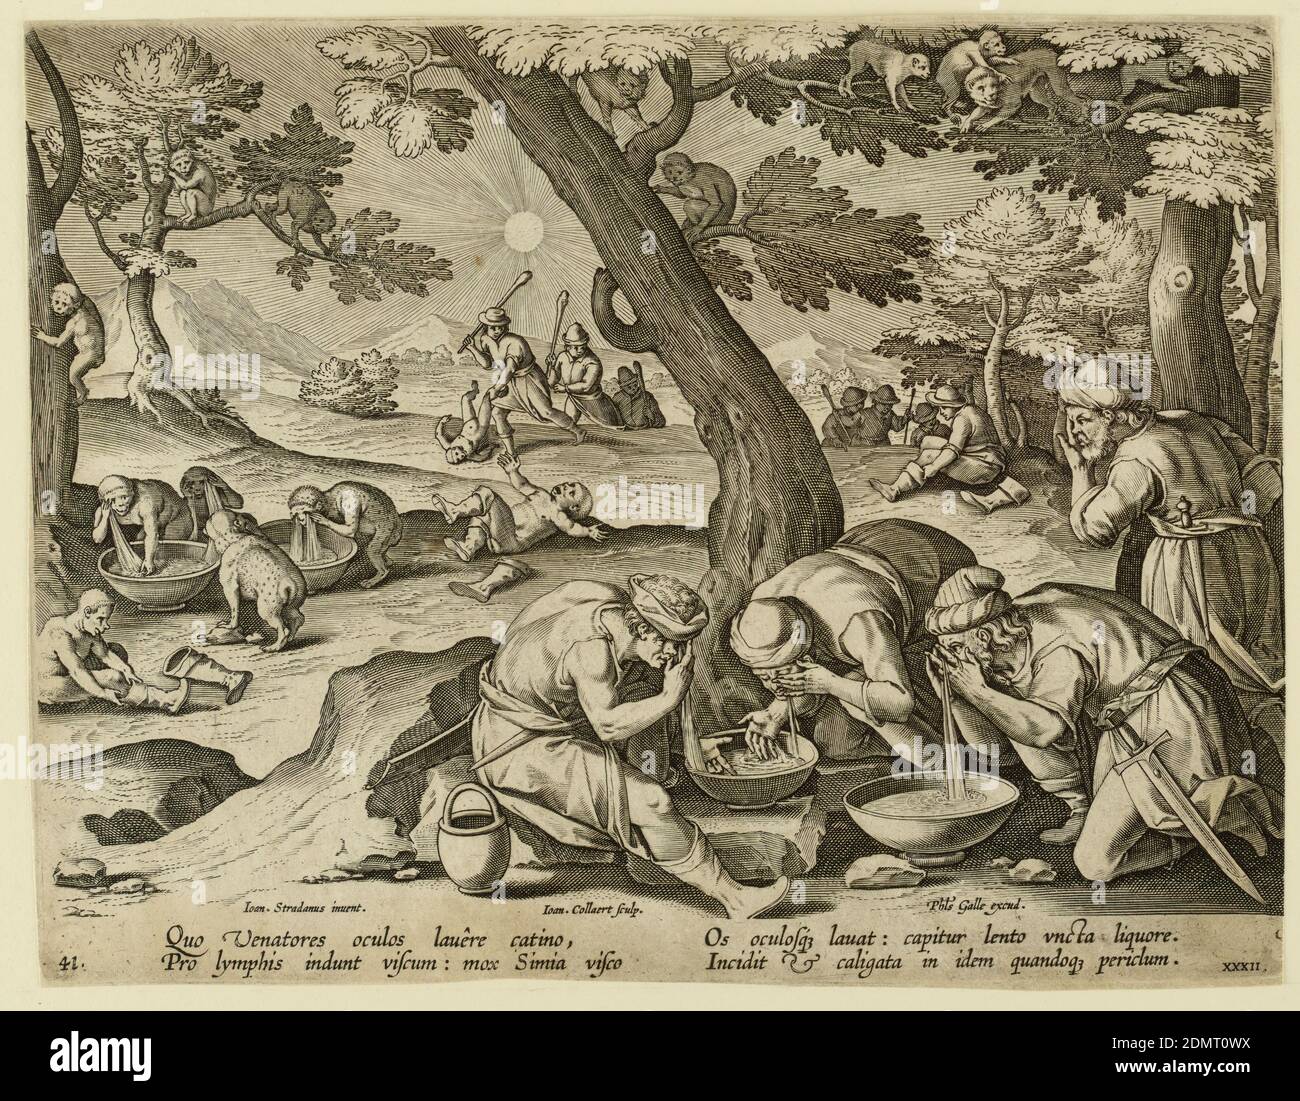 Apes imitating hunters, Jan van der Straet, called Stradanus, Flemish, 1523–1605, Jan Collaert II, Flemish, 1560 - 1628, Philips Galle, Flemish, 1537 - 1612, Engraving on paper, Horizontal rectangle. In the foreground, right, a group of men, washing their eyes, using the basins. In the middle ground, a number of apes imitates them. At lower left: 'Ioan. Stradanus invent.'; at left center: 'Ioan. Collaert Sculp.'; at lower right: 'Phls Galle excud.' Below: 'QUO VENATORES OCULUS...', Netherlands, 1596 or after, figures, Print Stock Photo